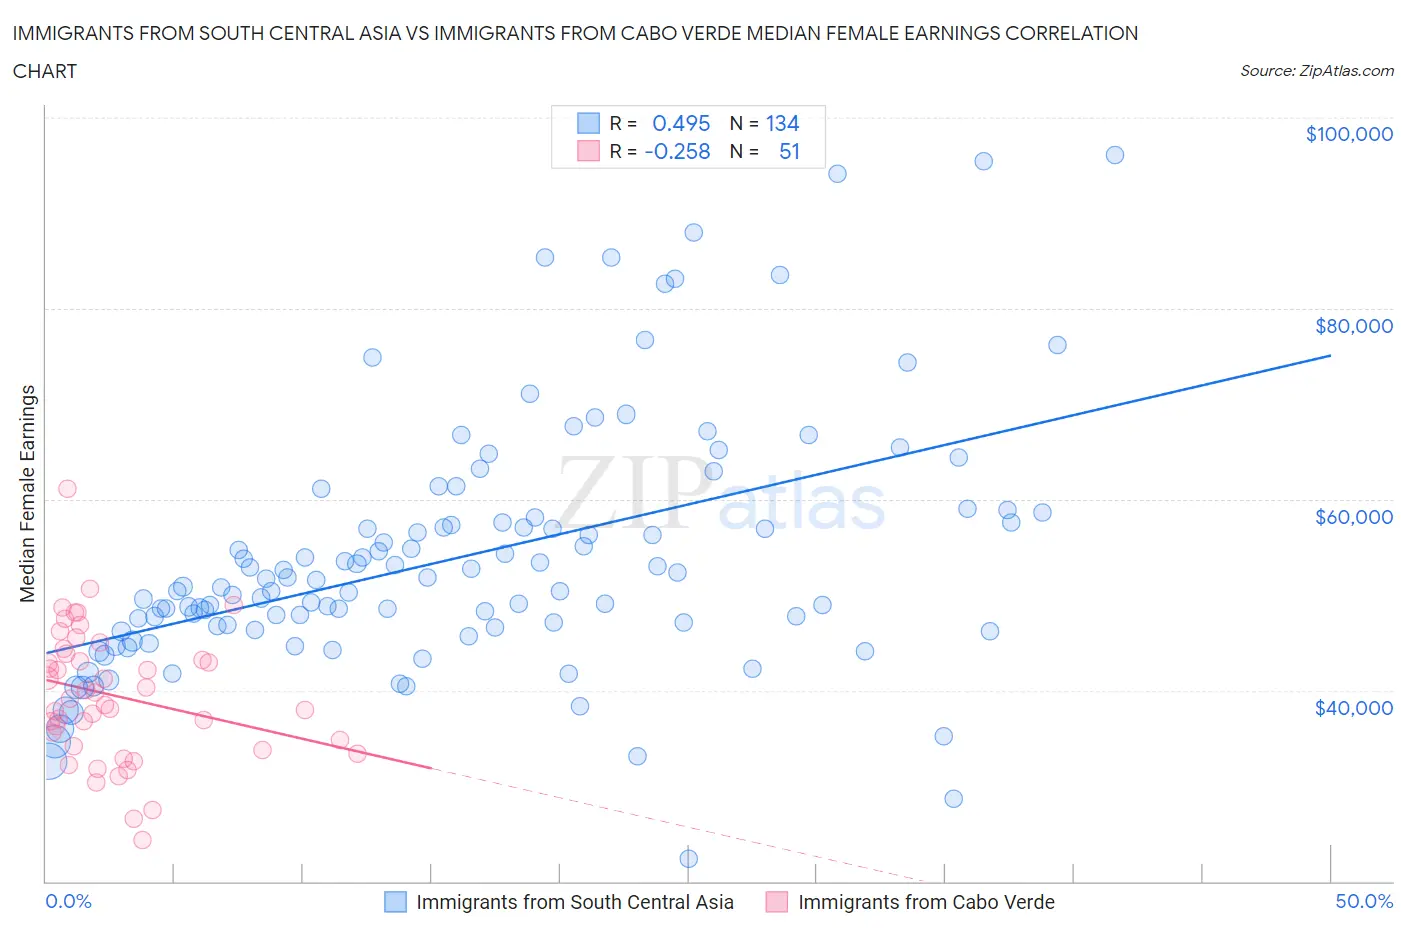 Immigrants from South Central Asia vs Immigrants from Cabo Verde Median Female Earnings